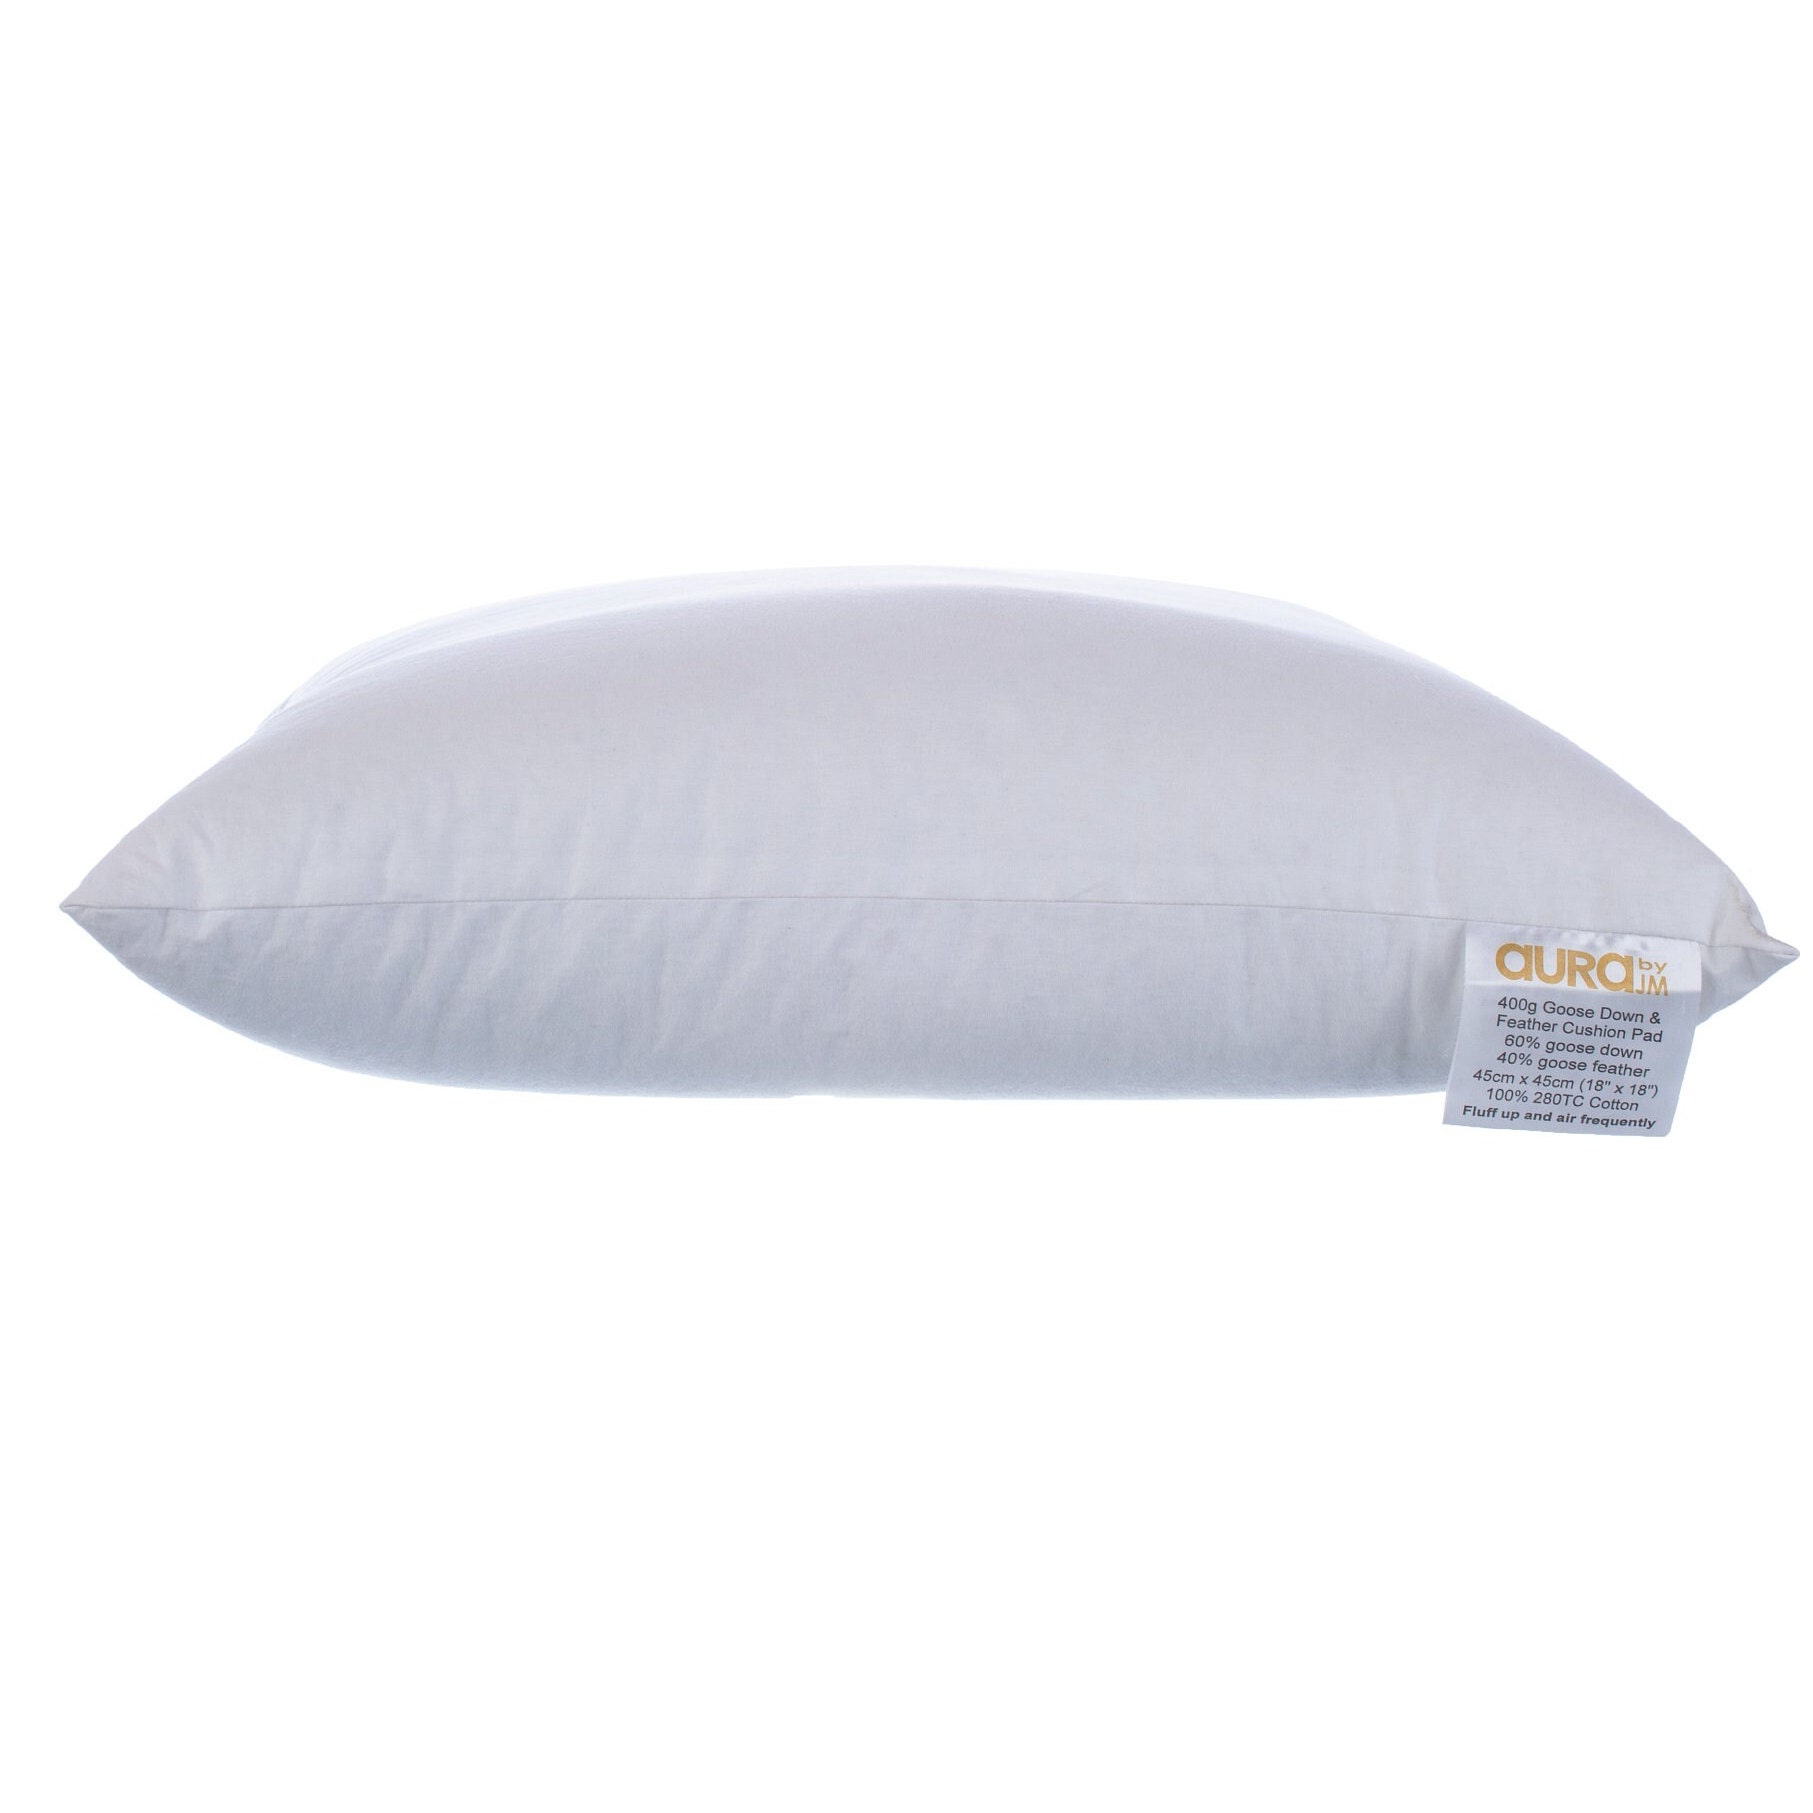 18x18 inch Luxury Goose Down Feather Pillow inserts